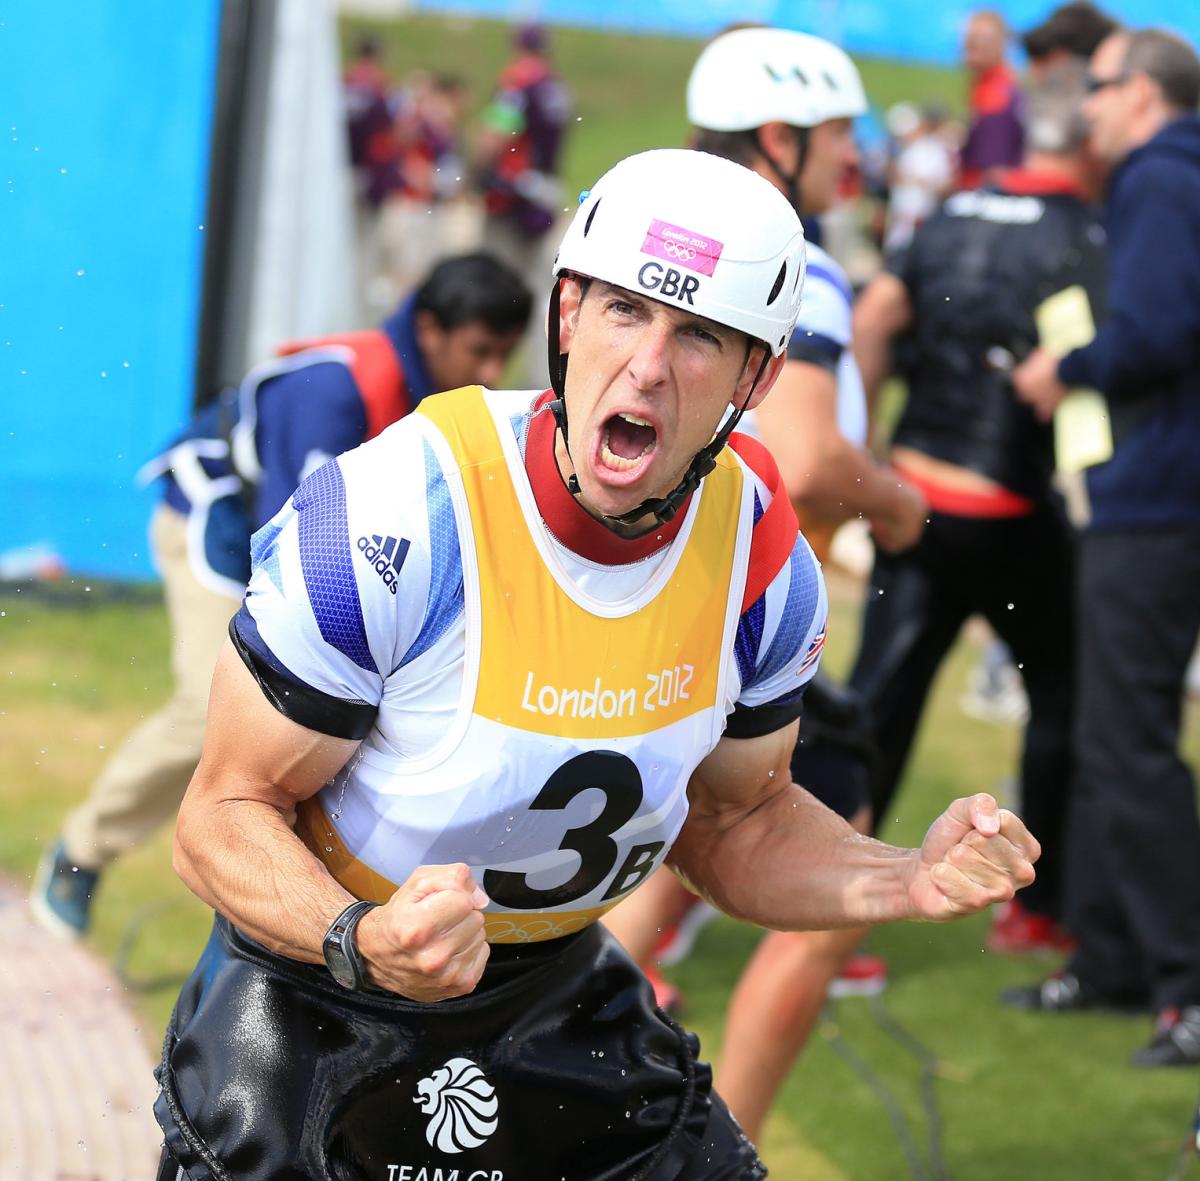 Elienne Stott celebrates a gold medal for Team GB in the Men's Canoe Double (C2) at Lee Valley White Water Centre, on the sixth day of the London 2012 Olympics. Pic: PA